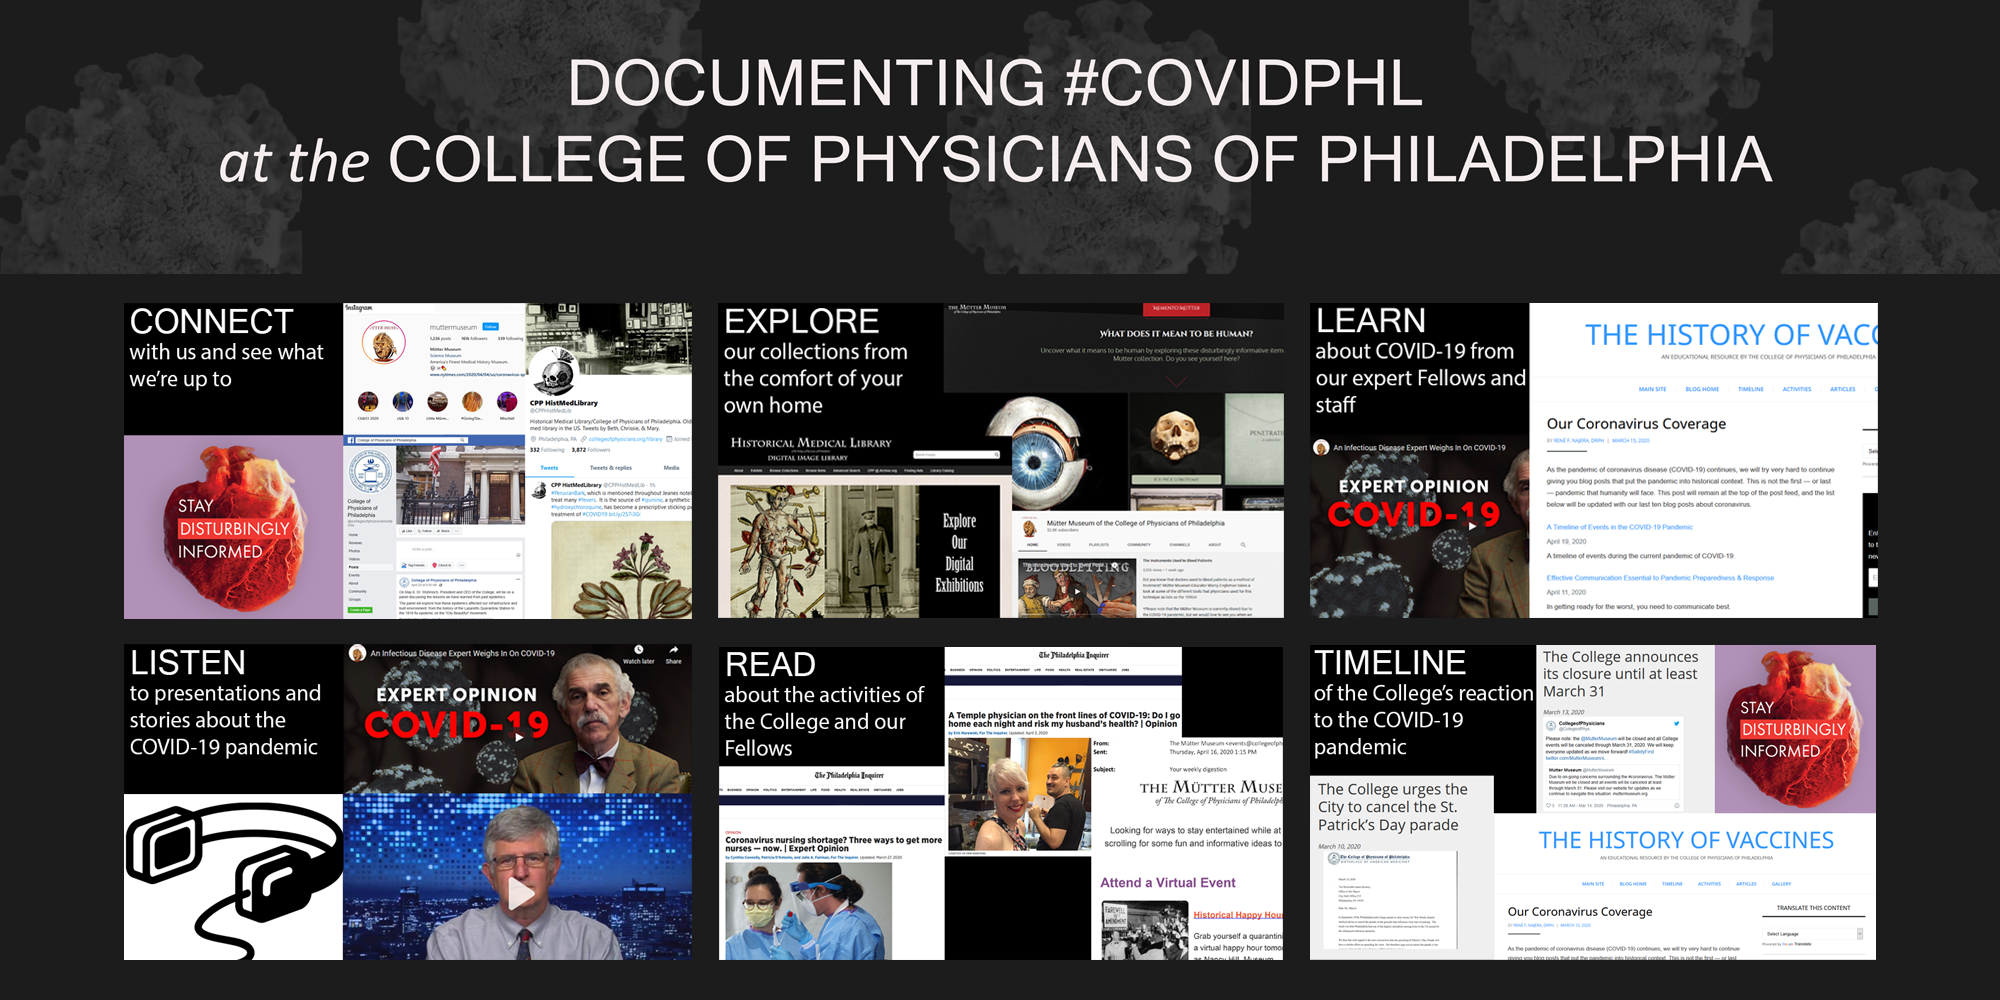 Documenting #COVIDPHL at The College of Physicians of Philadelphia